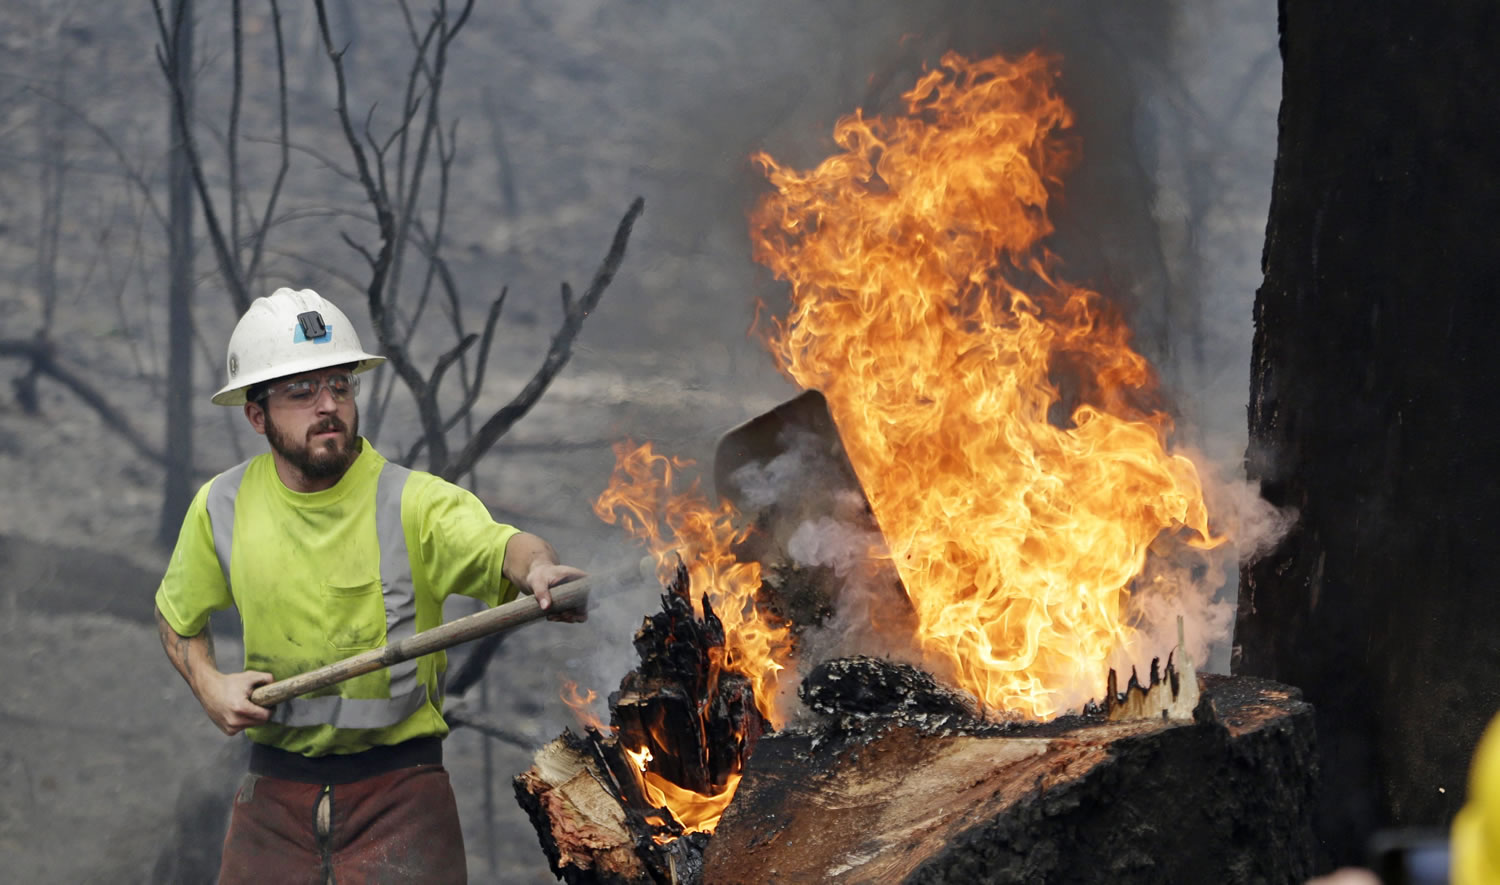 Utility worker Michael Quinliven shovels dirt onto a burning stump so he can cut down the charred ponderosa pine next to it Monday, Sept. 14, 2015, in Middletown, Calif. Utility crews worked to remove fire-damaged trees that took down power lines and threatened further damage following a wildfire there two days earlier. Two of California's fastest-burning wildfires in decades overtook several Northern California towns, killing at least one person and destroying hundreds of homes and businesses and sending thousands of residents fleeing highways lined with buildings, guardrails and cars still in flames.